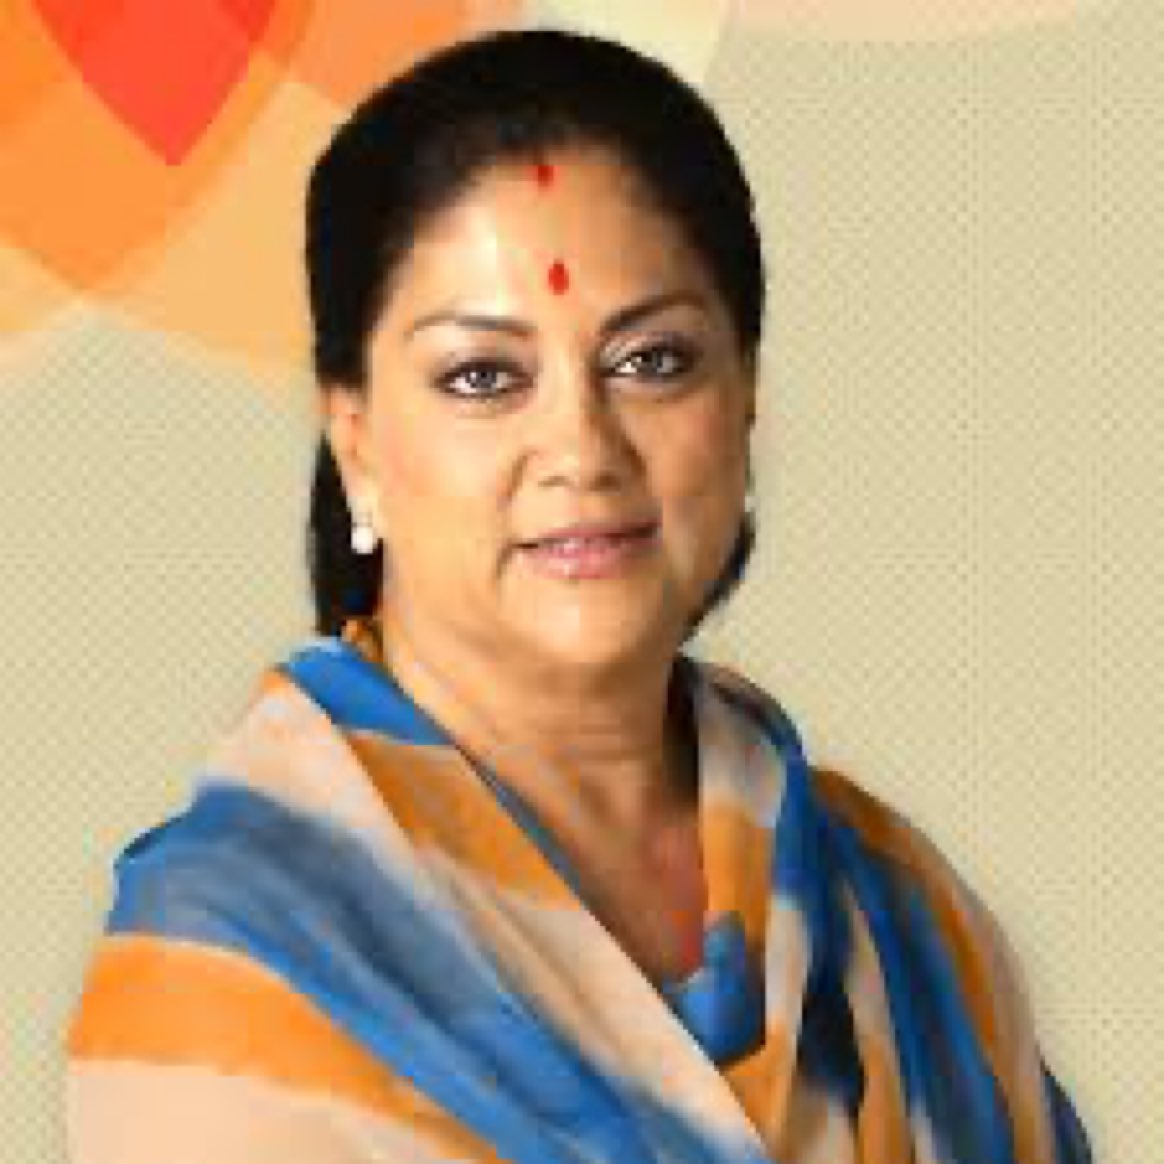 What will BJP offer Vasundhara Raje in lie of the Chief Minister post of Rajasthan?

Write your thoughts below .

CC: @PMOIndia @AmitShahOffice
@VasundharaBJP 
#VasundharaRaje #RajasthanPolitics #BJP #ChiefMinister #PoliticalFuture #NextMove #PowerStruggle #InternalPolitics